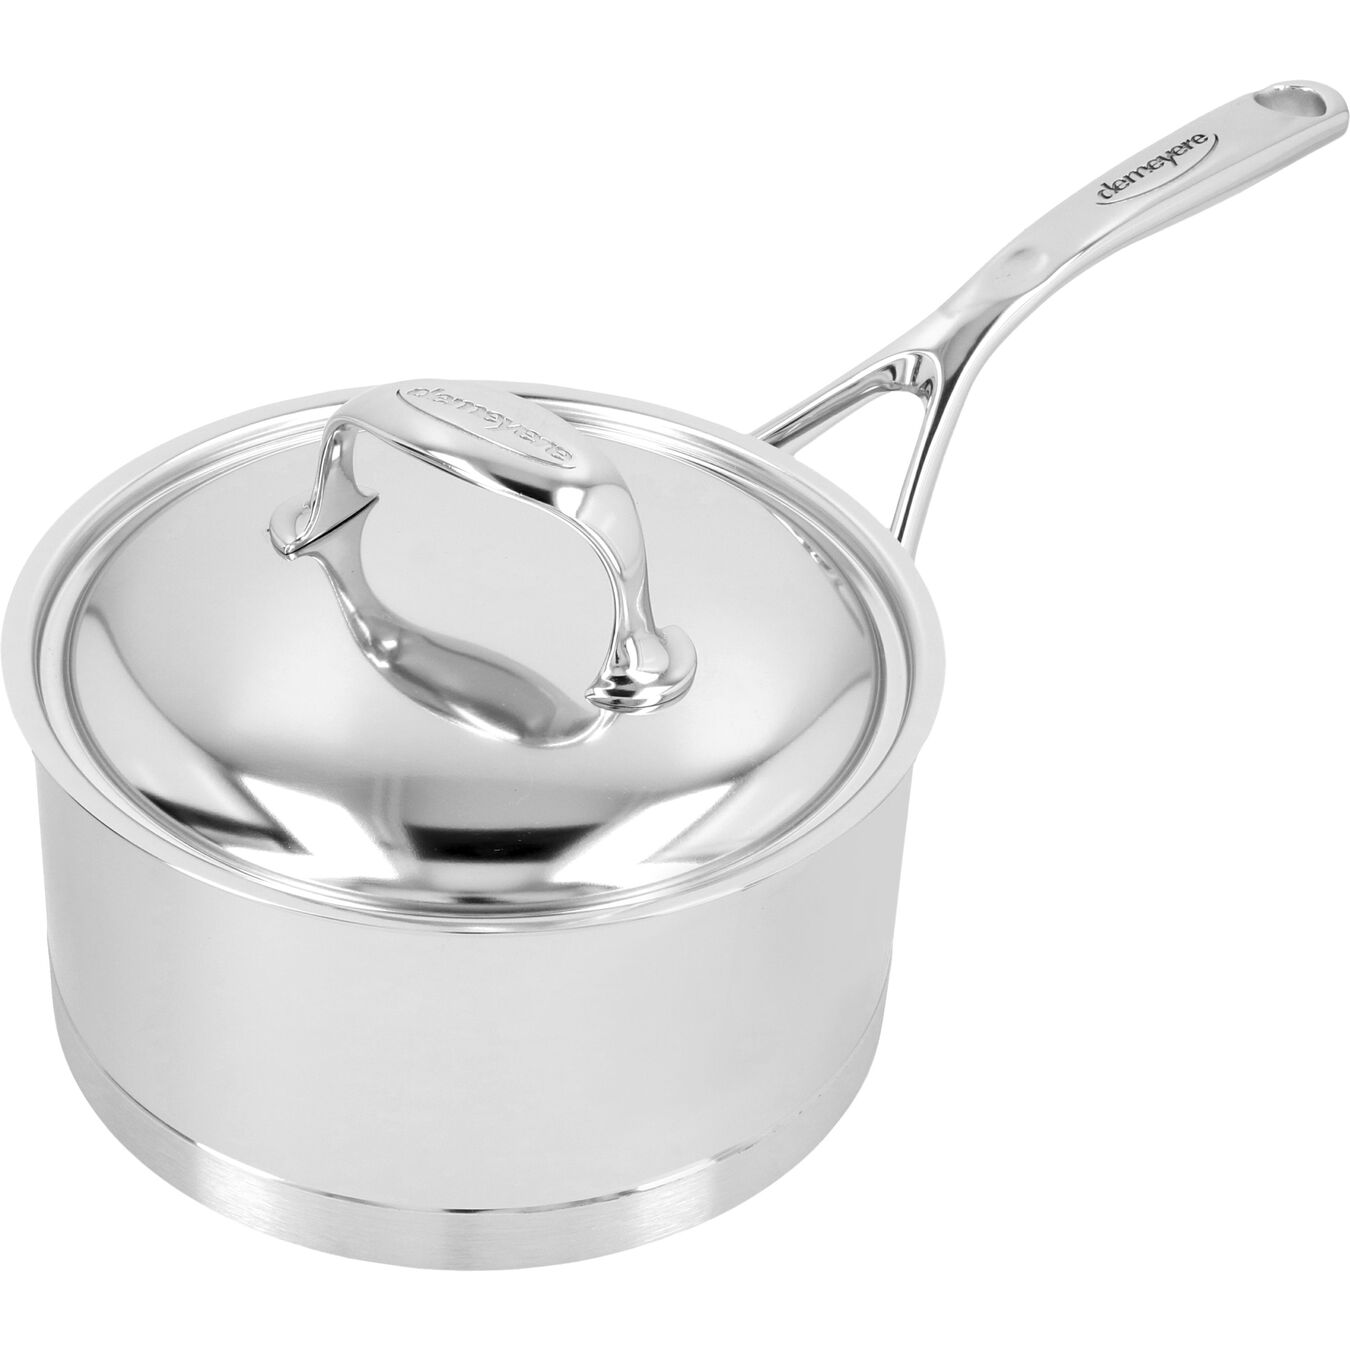 2.2 l 18/10 Stainless Steel round Sauce pan with lid, silver,,large 3